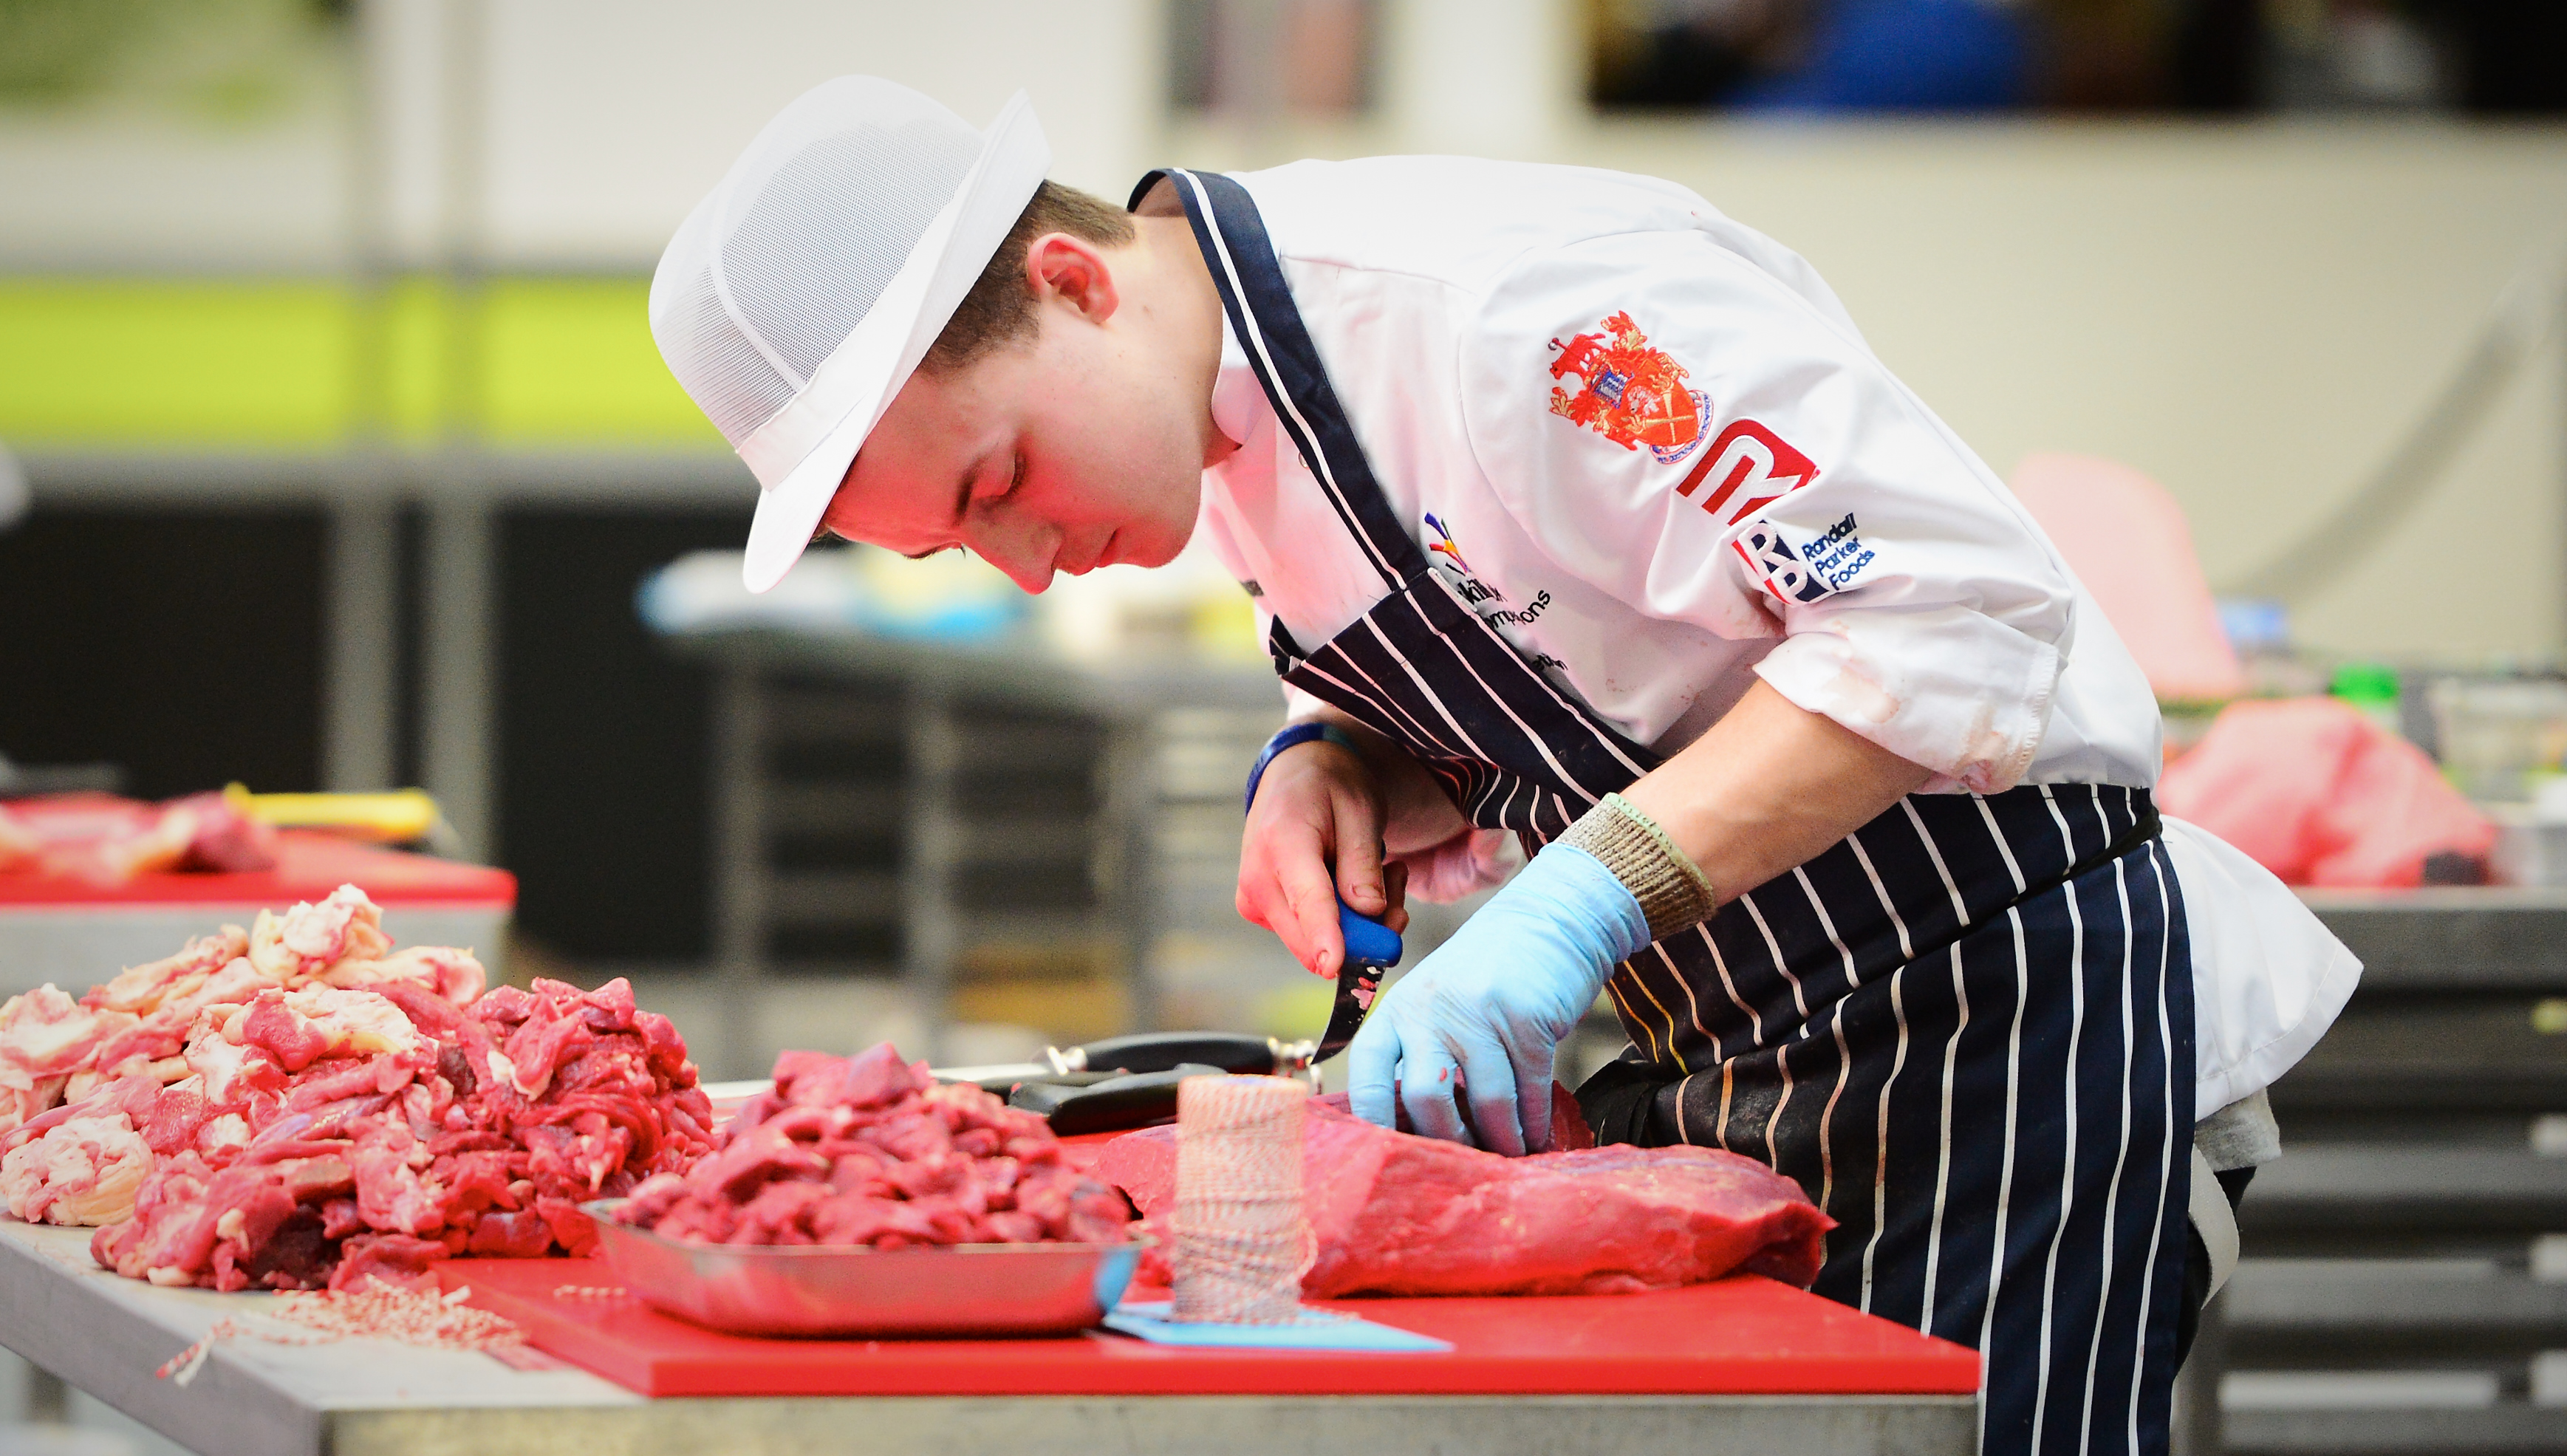 Now in its second year, the Butchery WorldSkills UK competition, sponsored ...